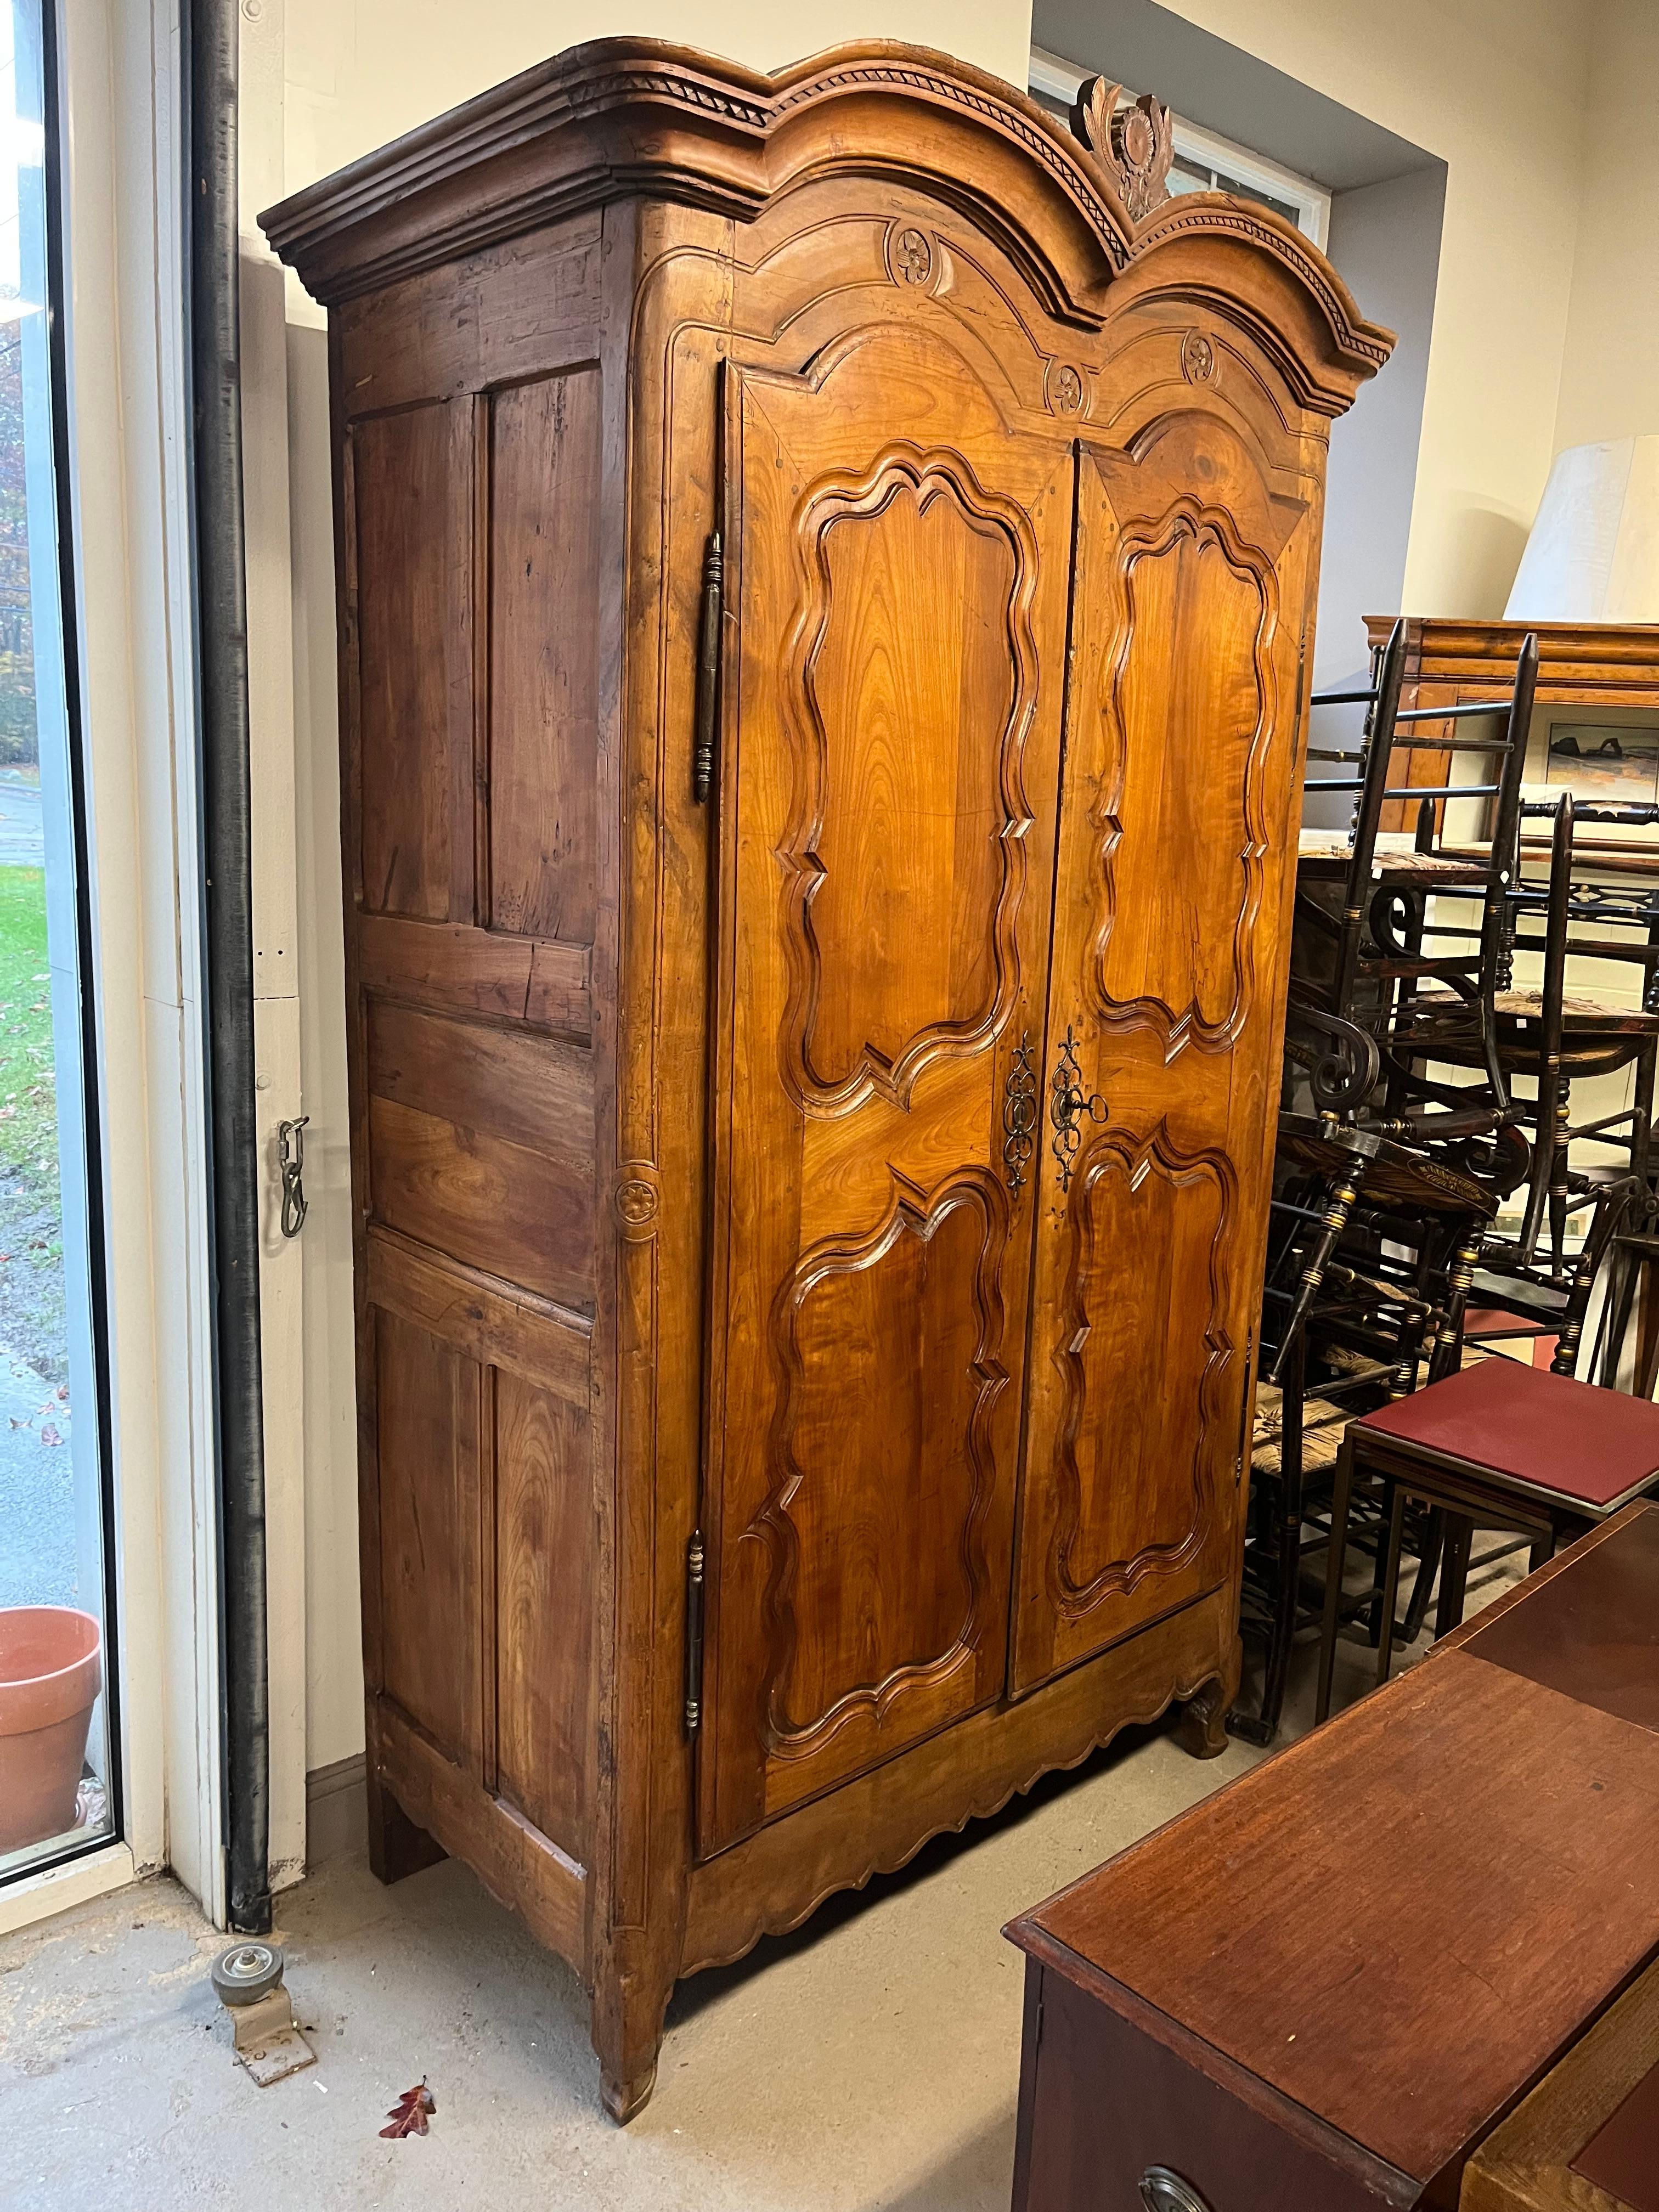 An impressive Louis XV period “double bonnet” armoire in wild cherry from the Brittany region of France. The 2 doors are carved with inset panels and floral motifs. The double crown has a carved sunflower bouquet with stylized leaves between the two